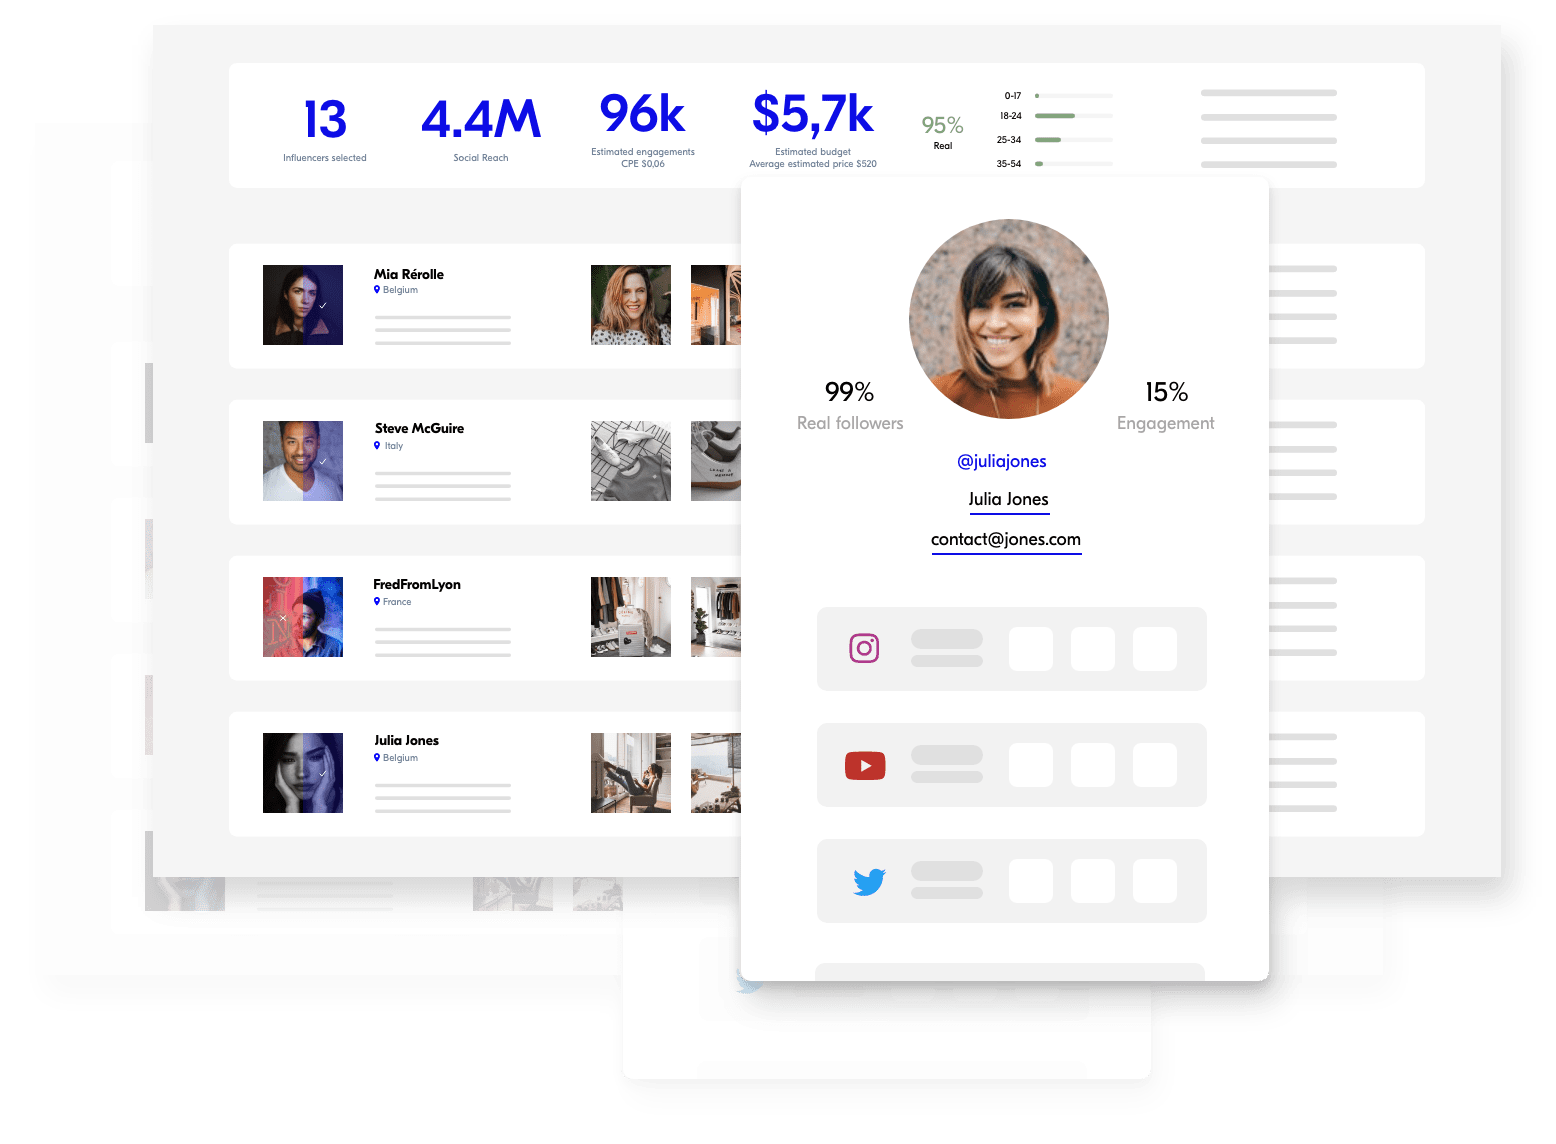 Upfluence page displays influencer profiles and their reach and engagement rates.